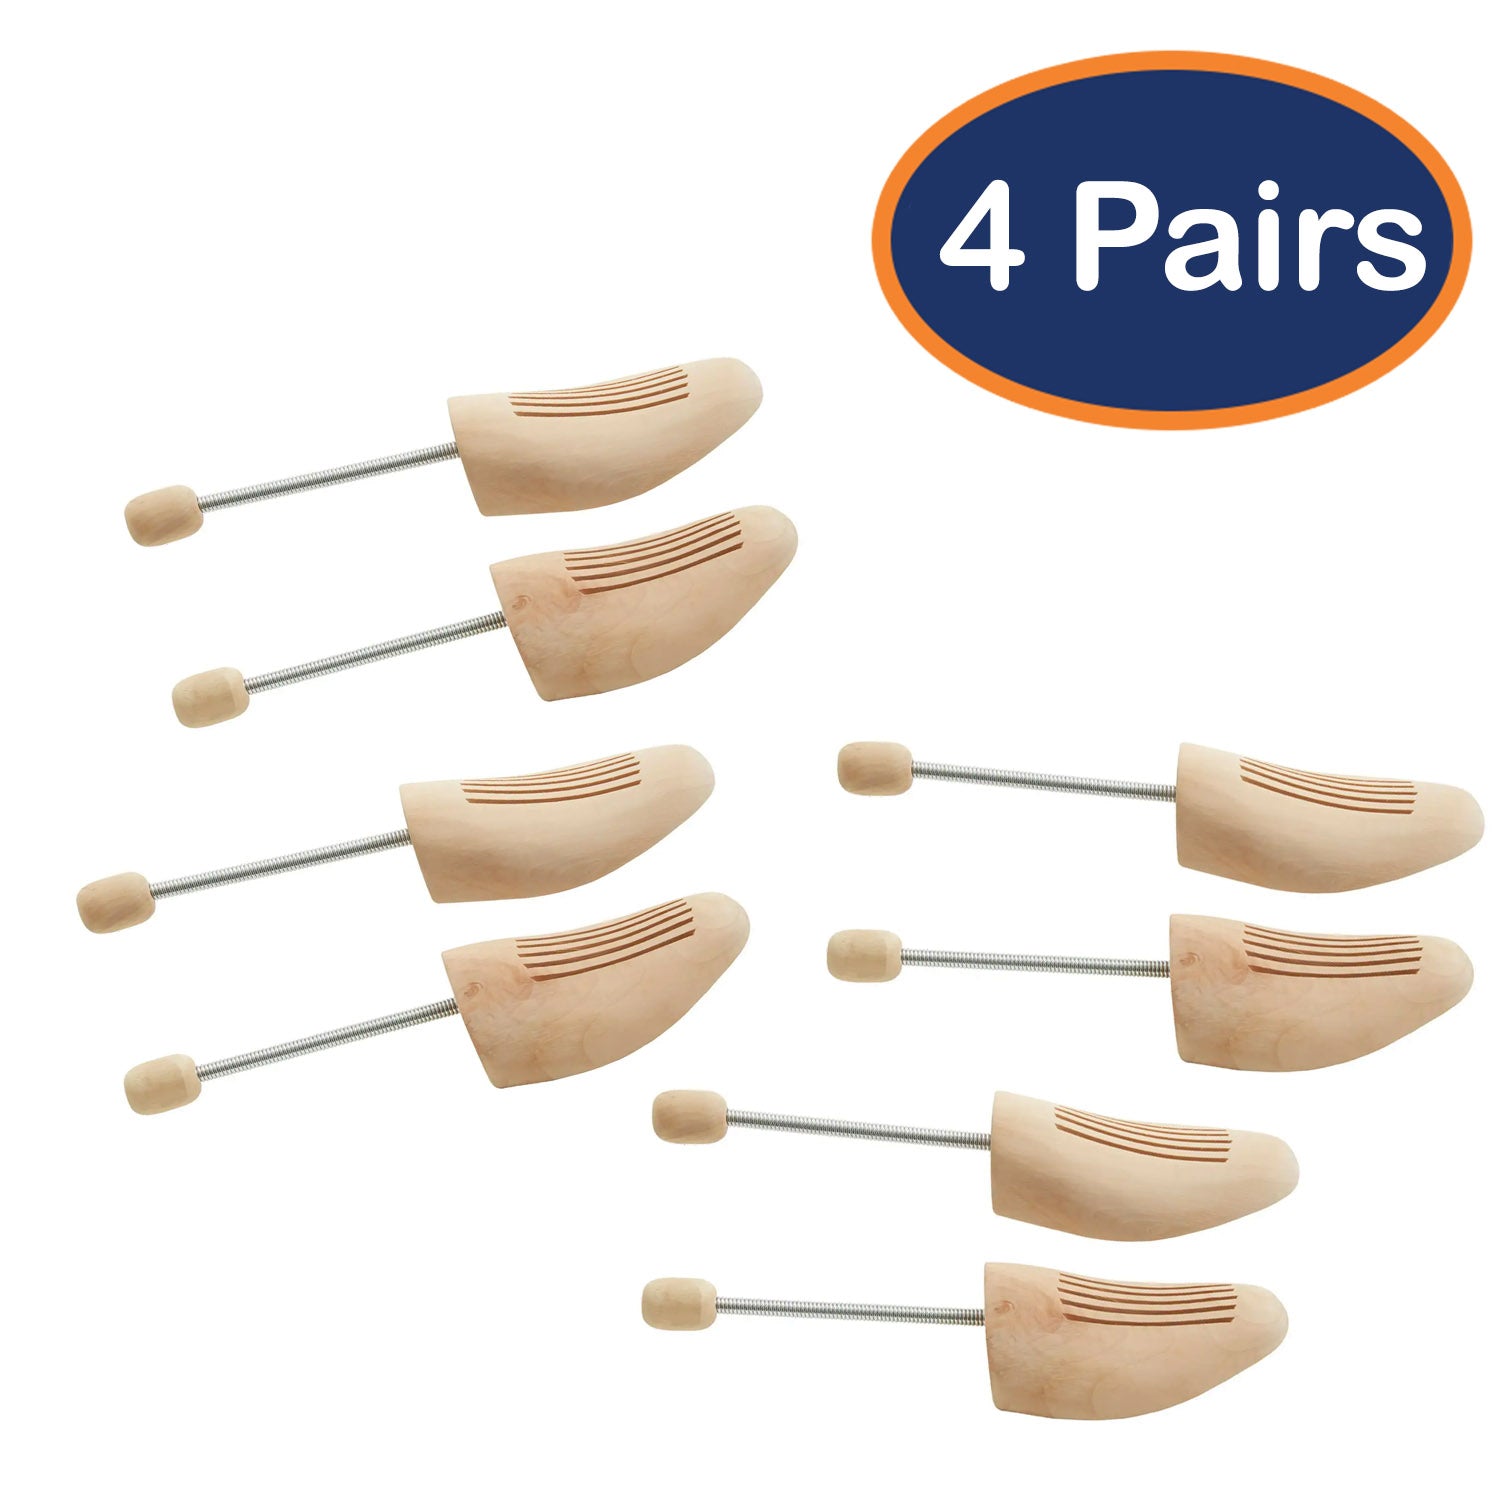 4-pairs of Size 7/8 Wooden Men's Shoes Shaper